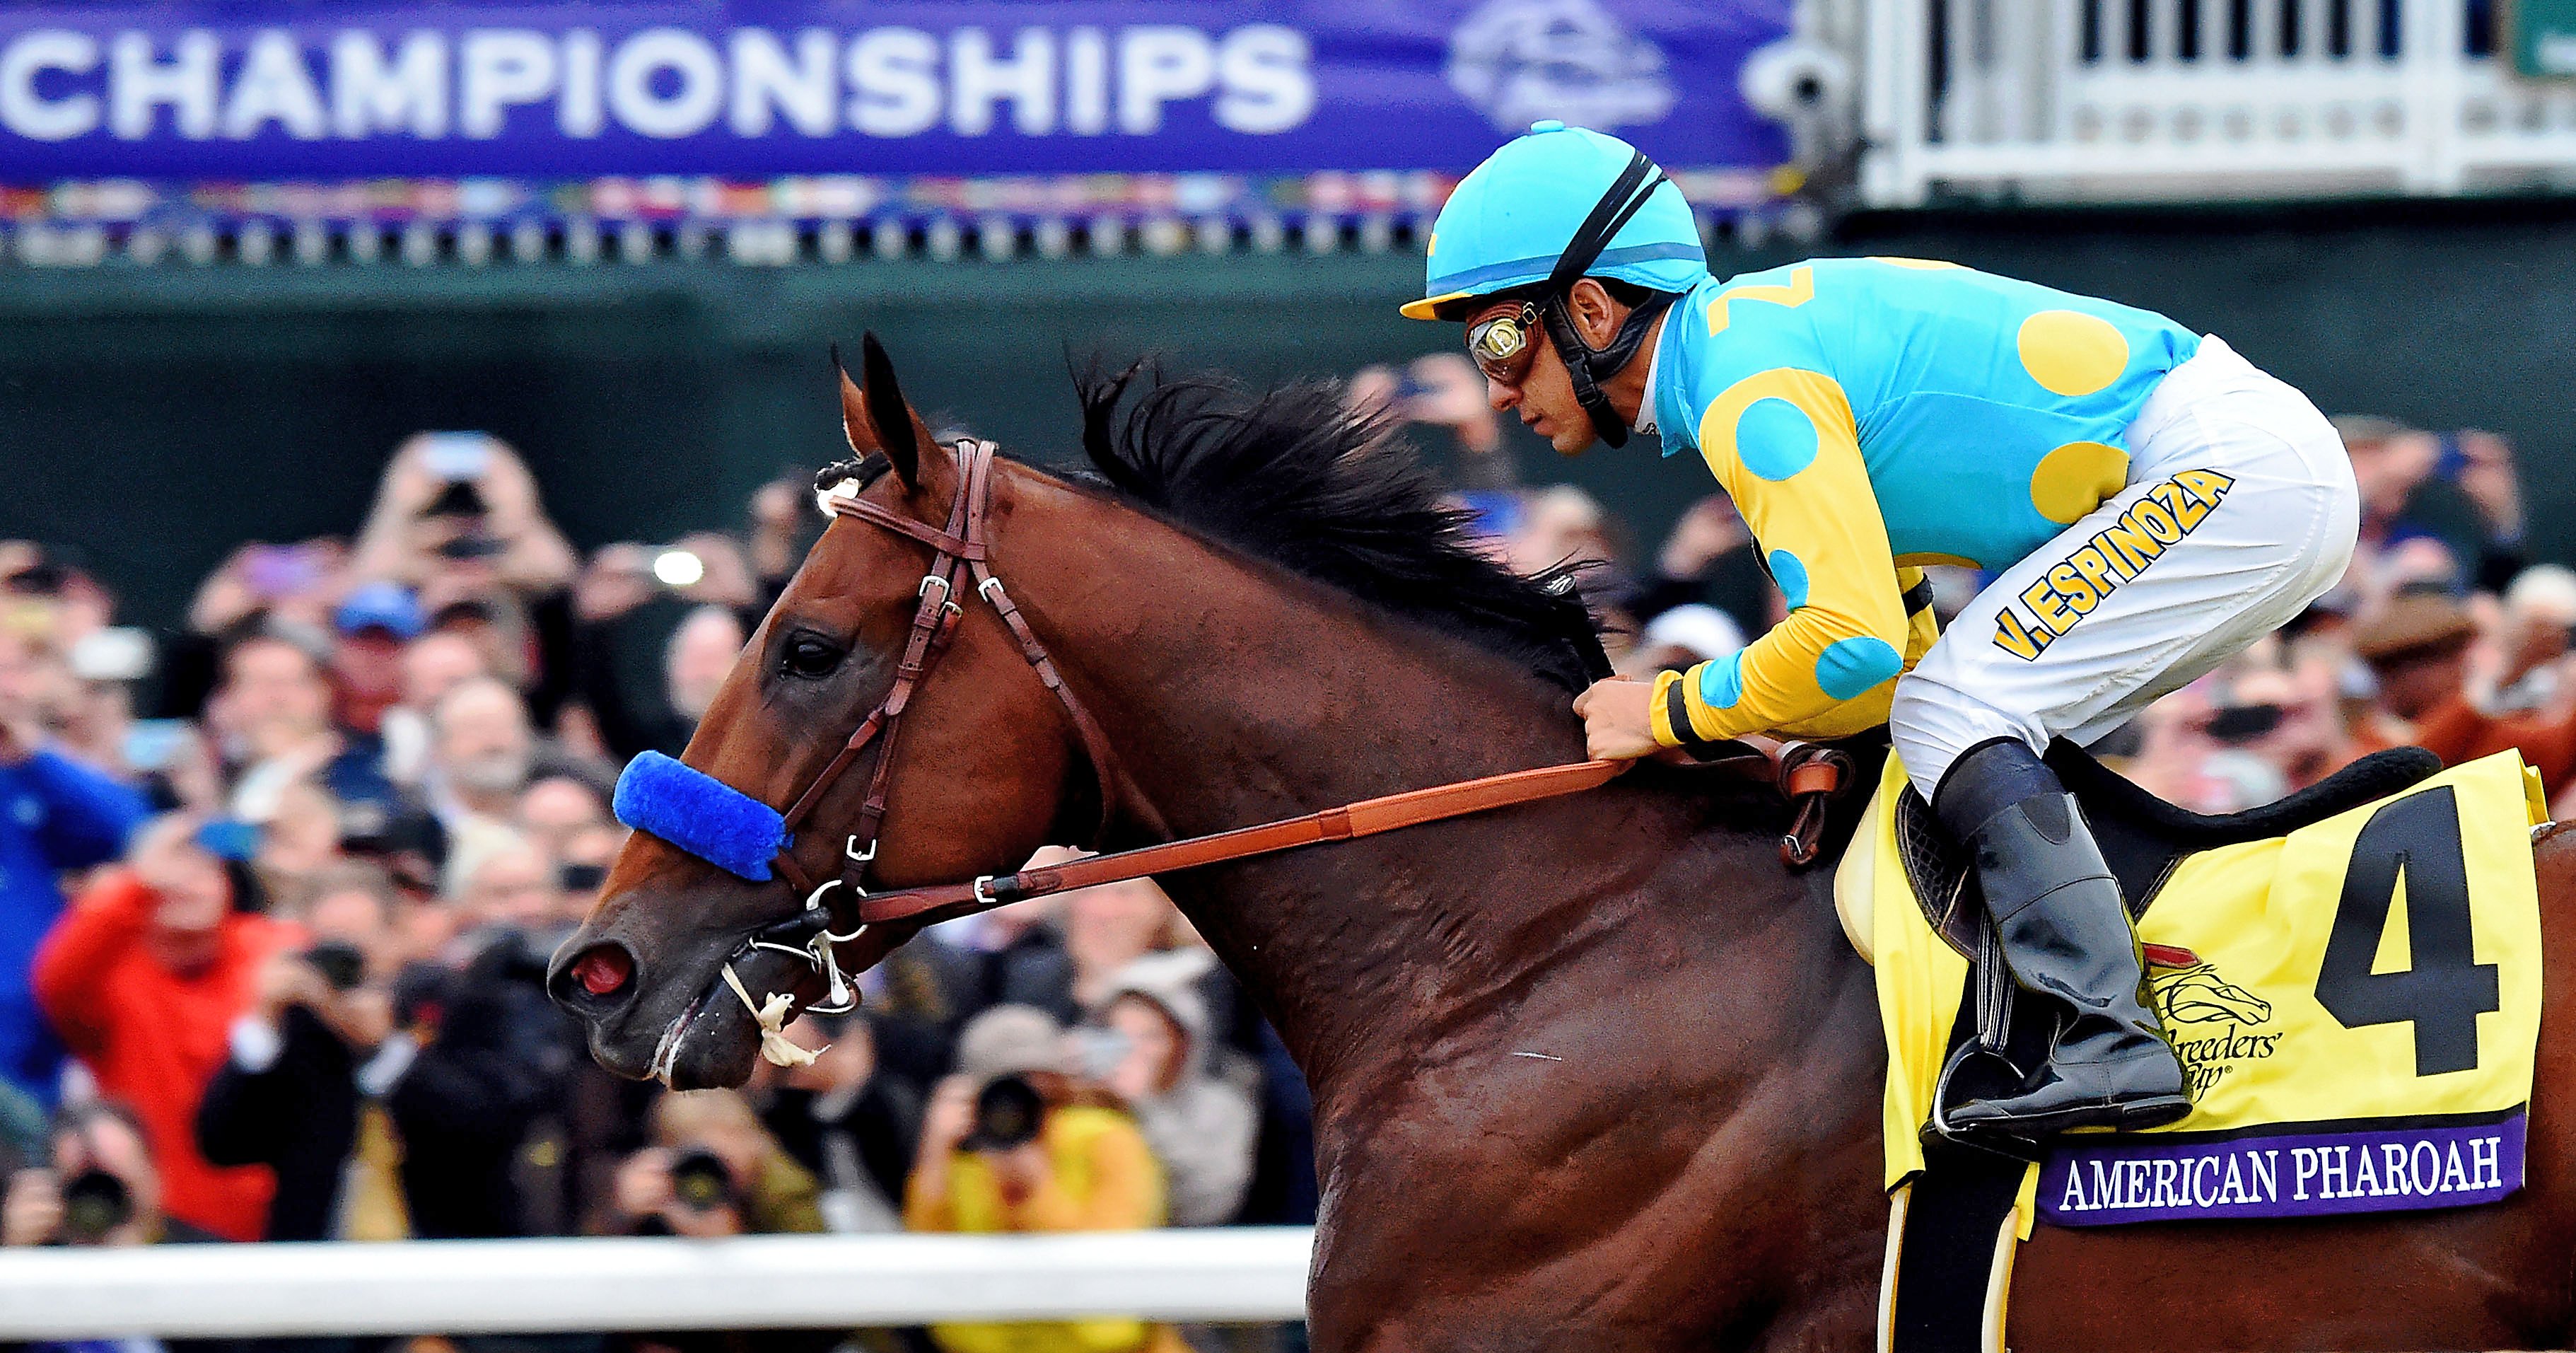 American Pharoah, Victor Espinoza up, winning the 2015 Breeders' Cup Classic at Keeneland in track-record time (Breeders' Cup/Eclipse Sportswire)